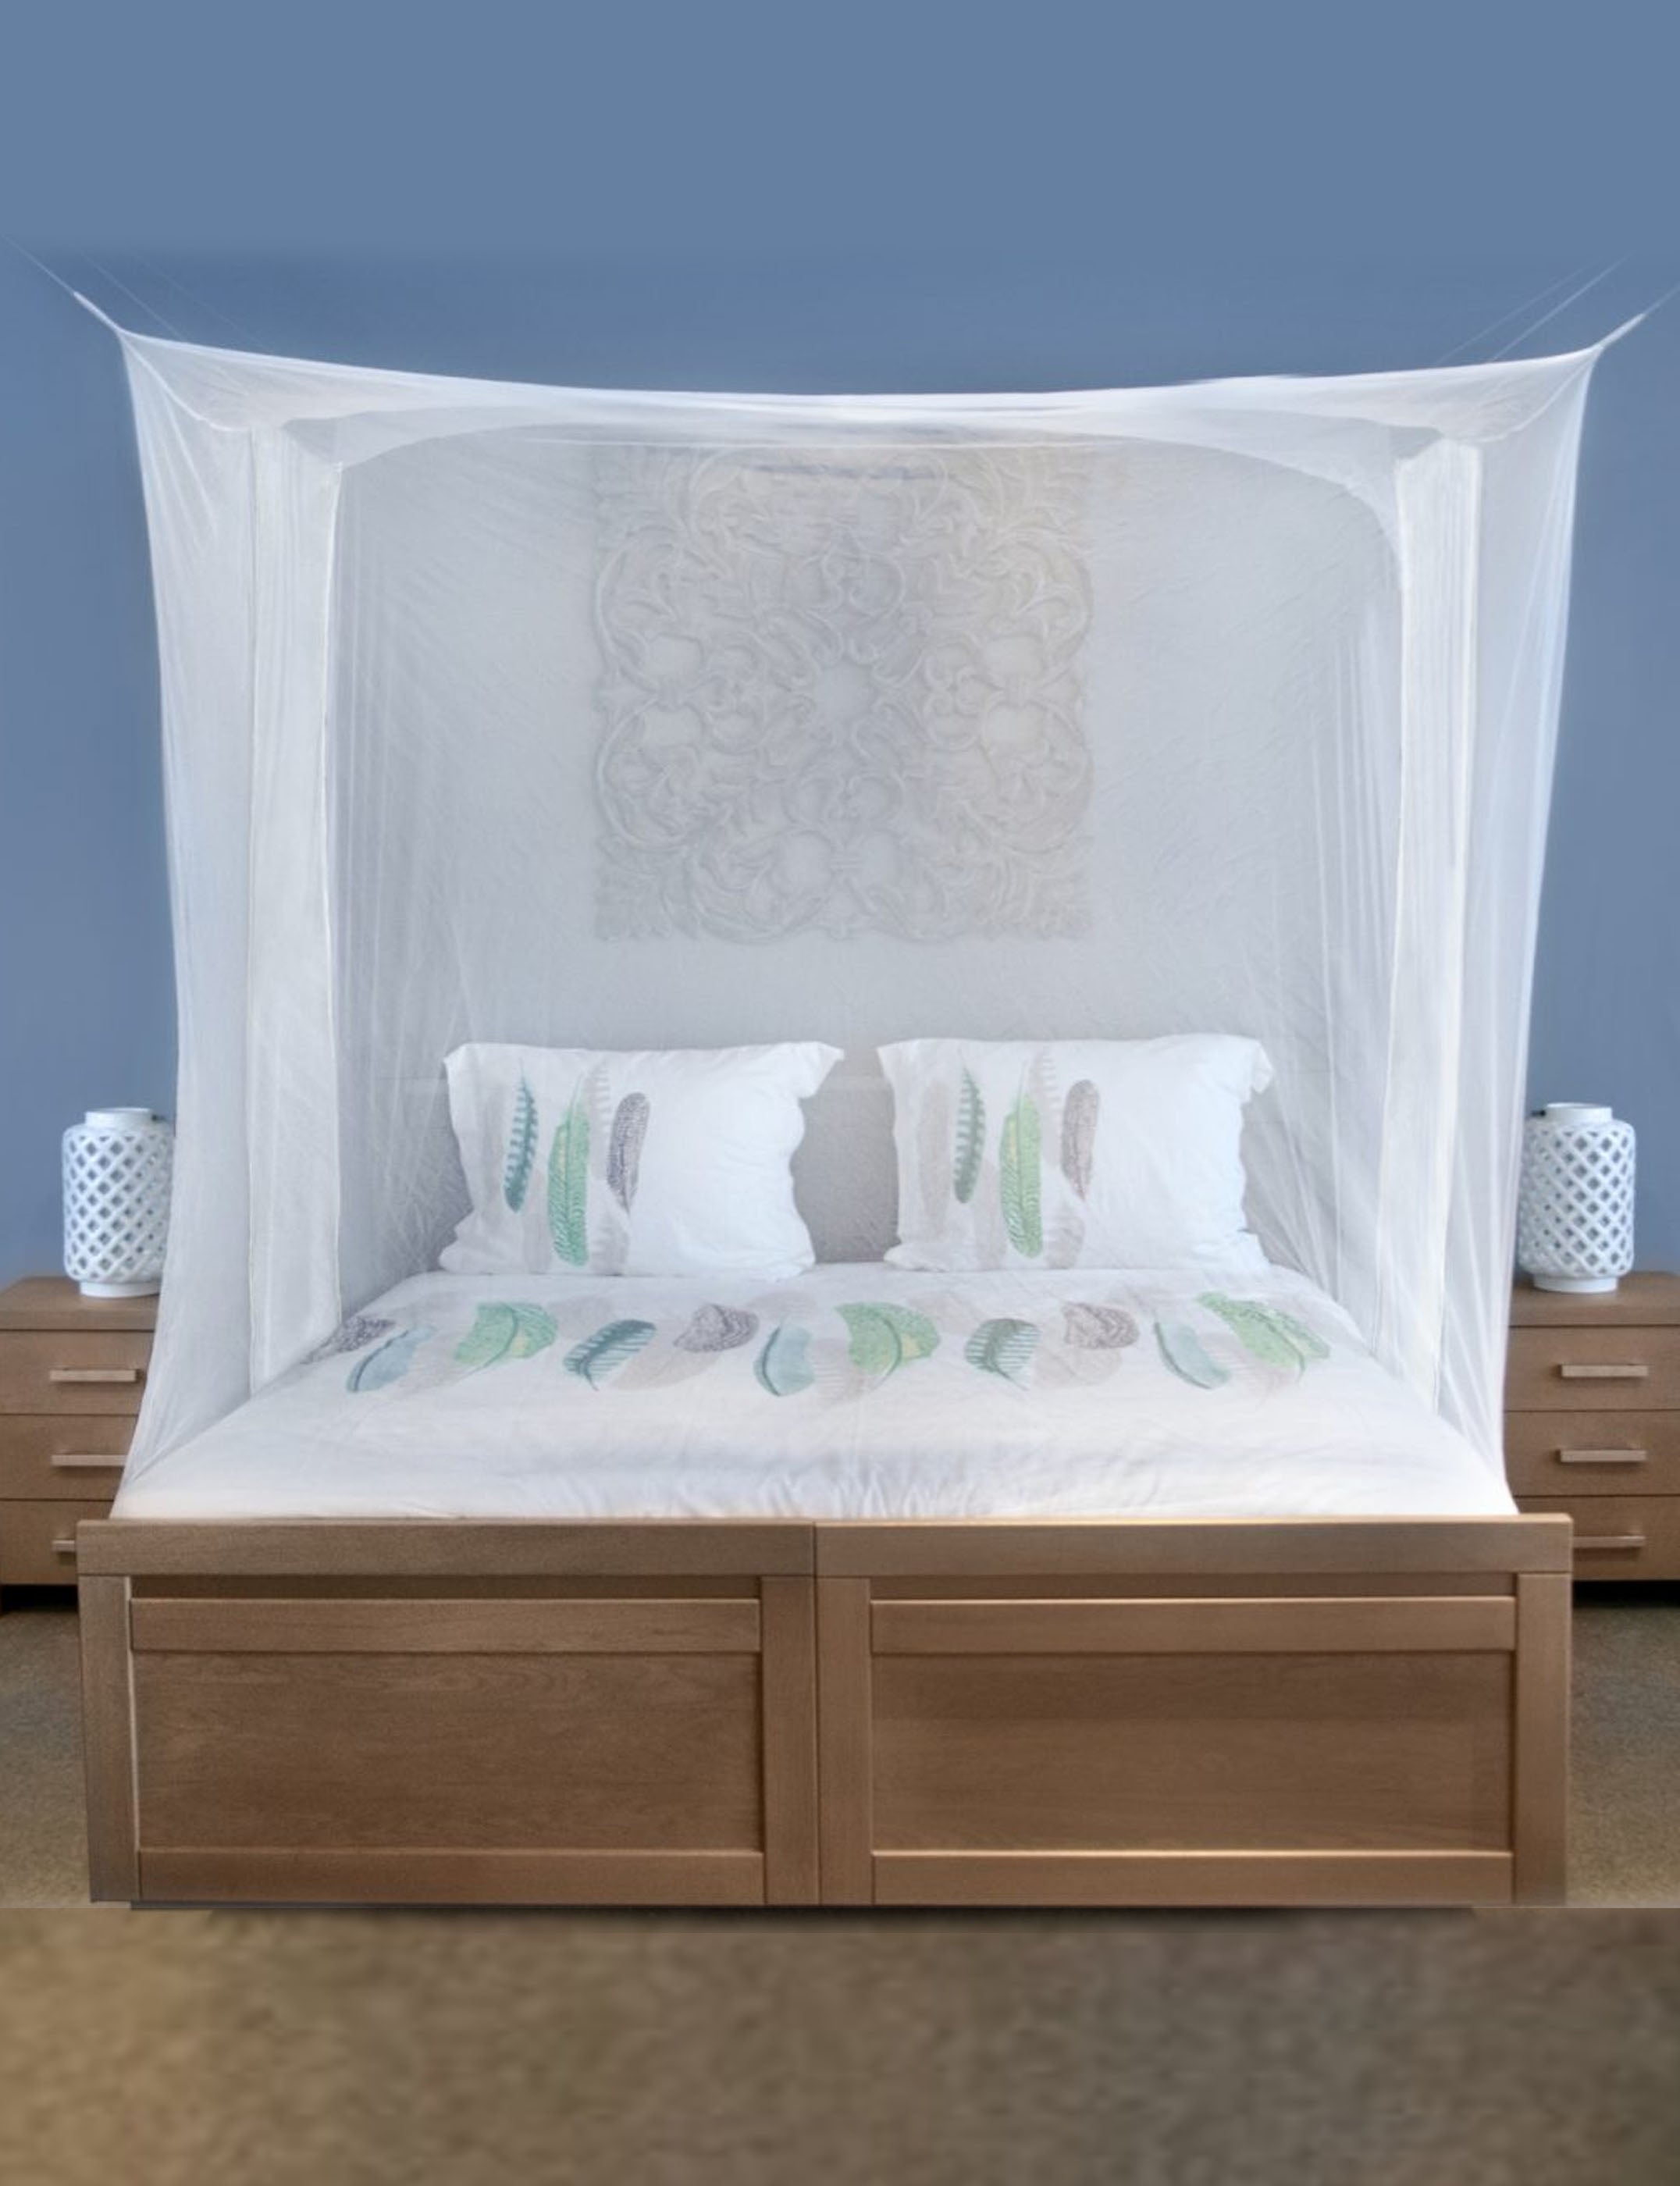 Mosquito Net – Home and beyond